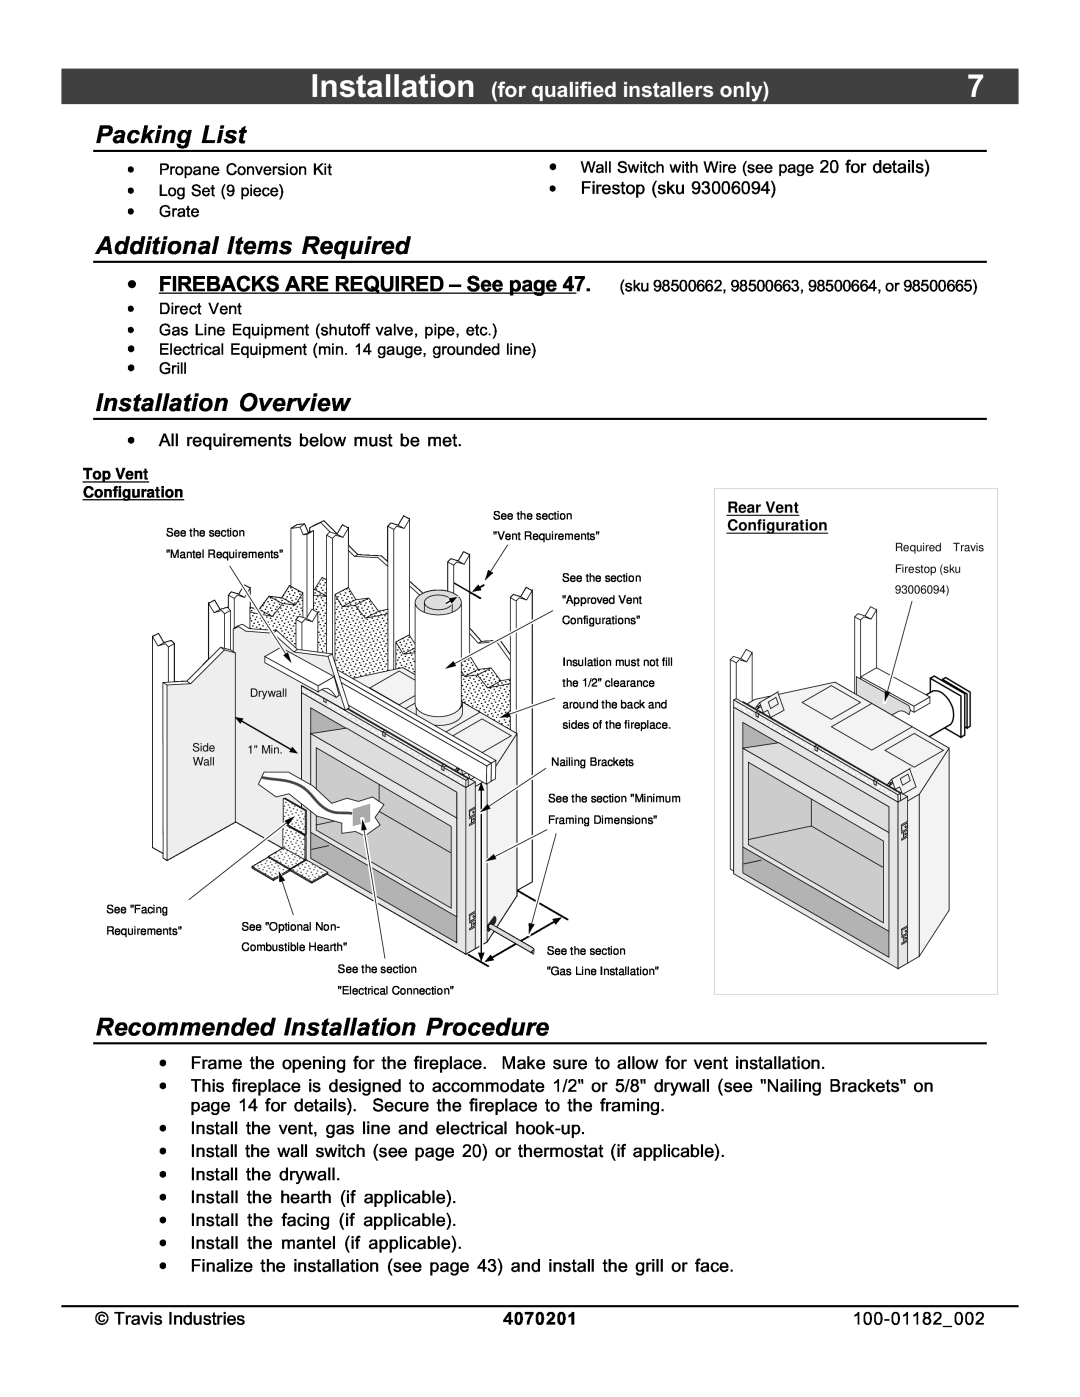 North Star 864 HH Packing List, Additional Items Required, Installation Overview, Recommended Installation Procedure 